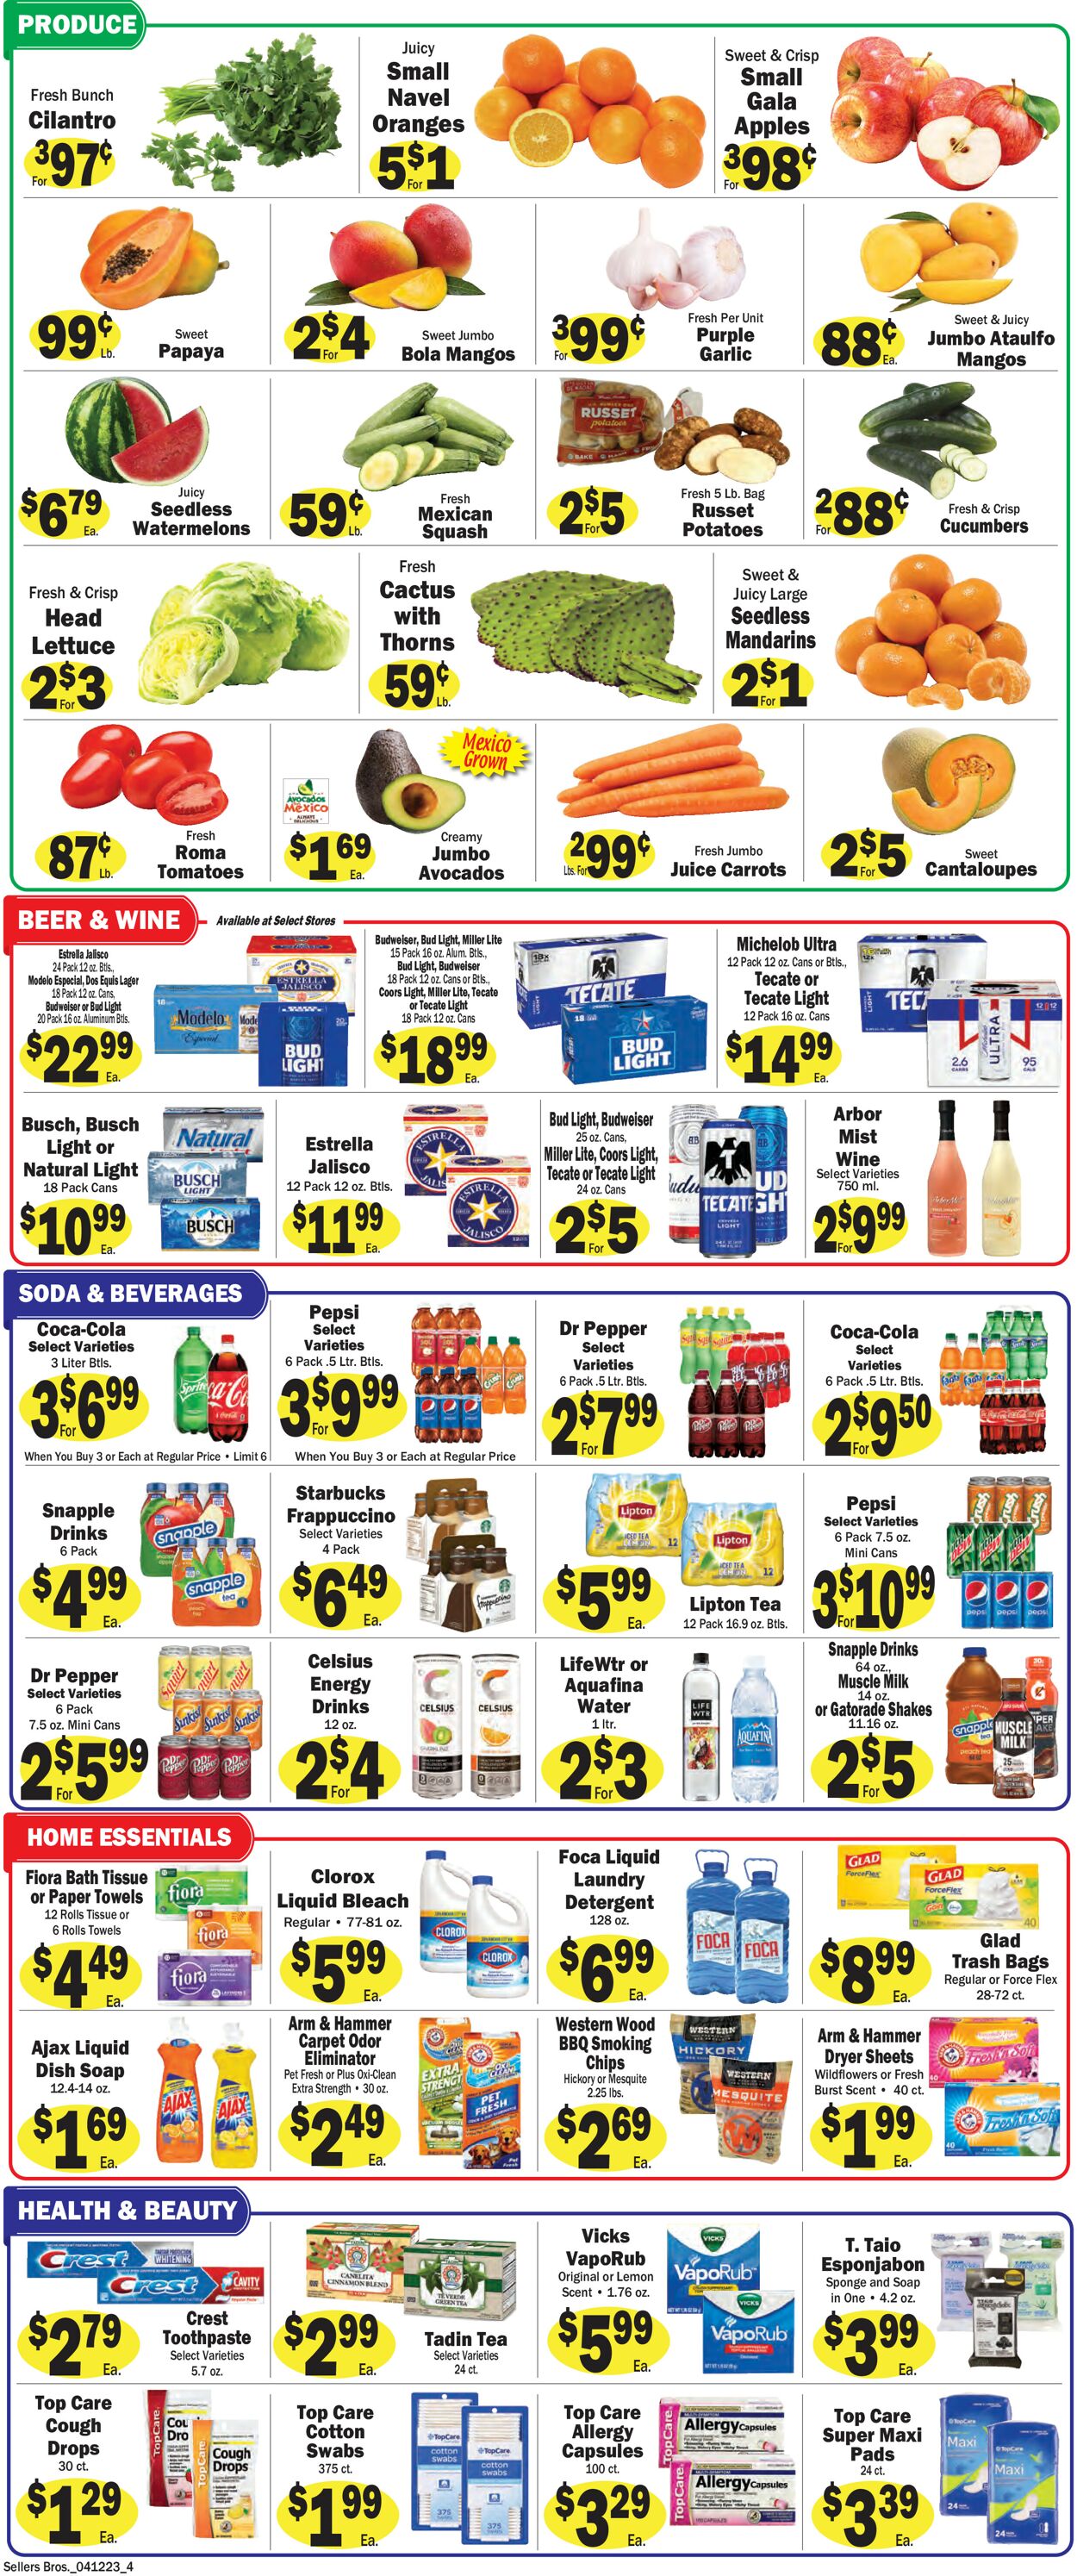 Sellers Bros. Ad from 04/12/2023